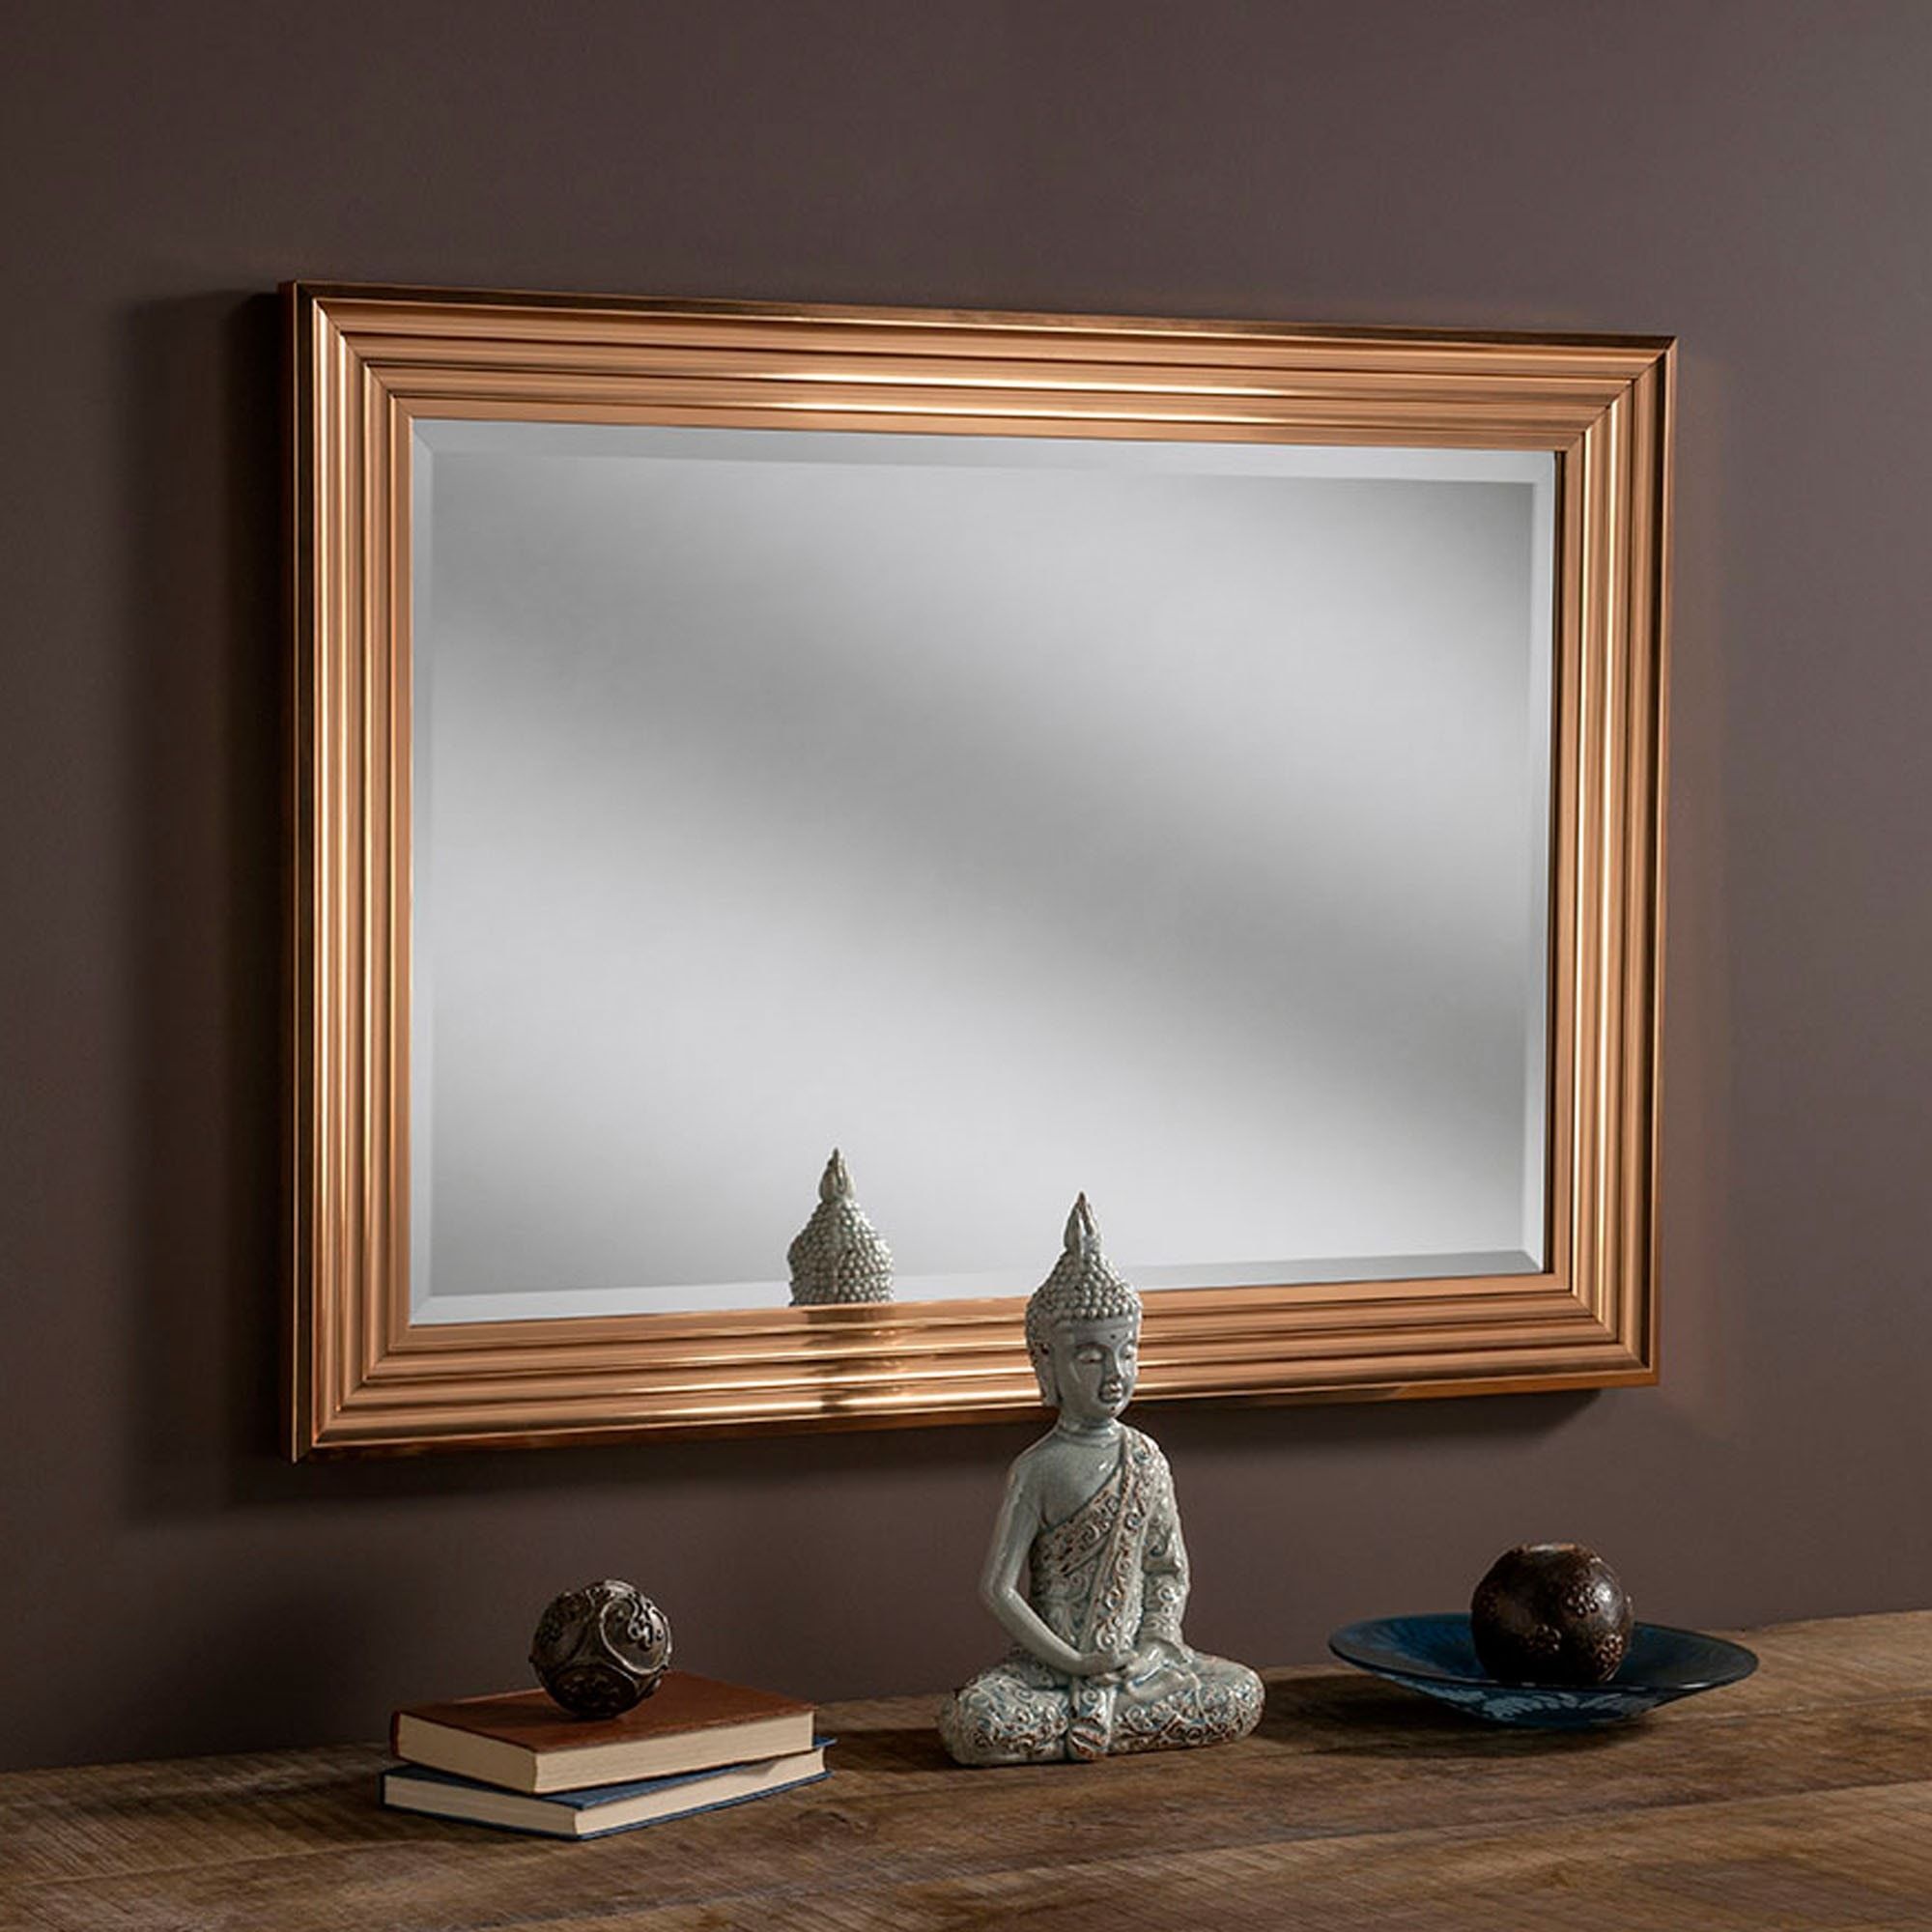 Rectangular Copper Decorative Mirror | Decorative Mirrors Pertaining To Accent Mirrors (View 11 of 15)